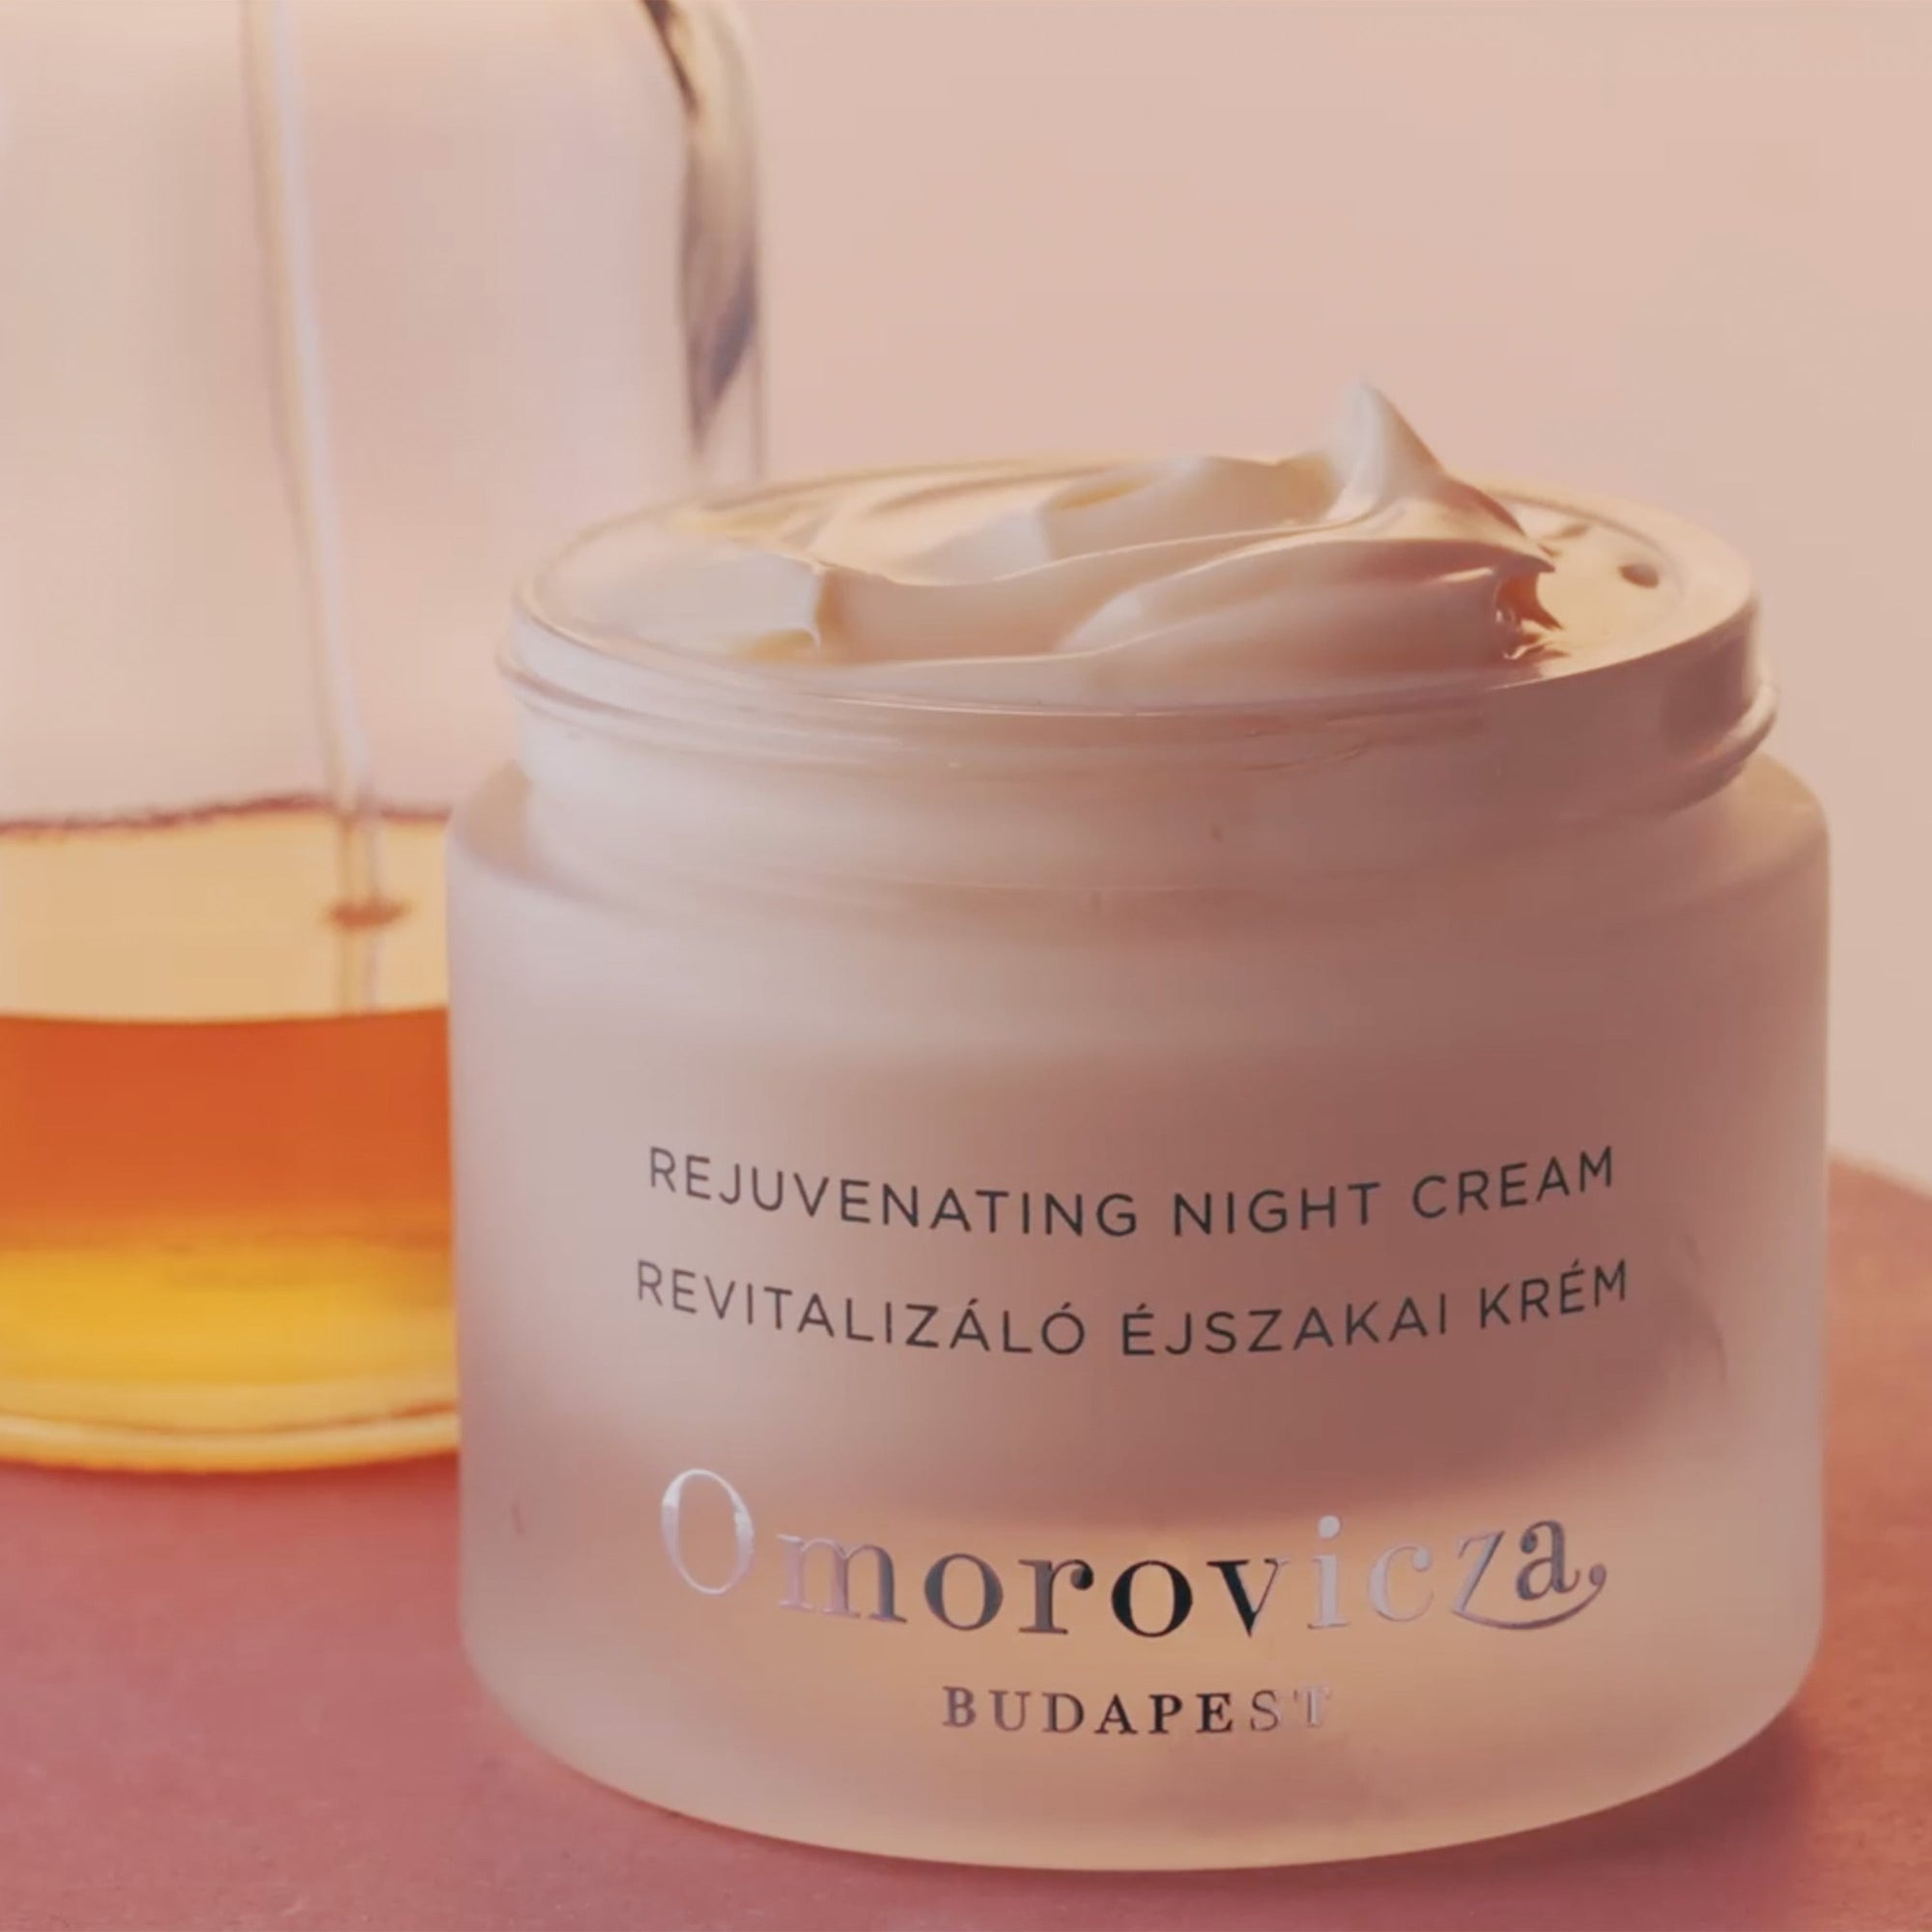 A close up of Rejuvenating Night Cream in an open jar, shows creamy and rich texture of the product